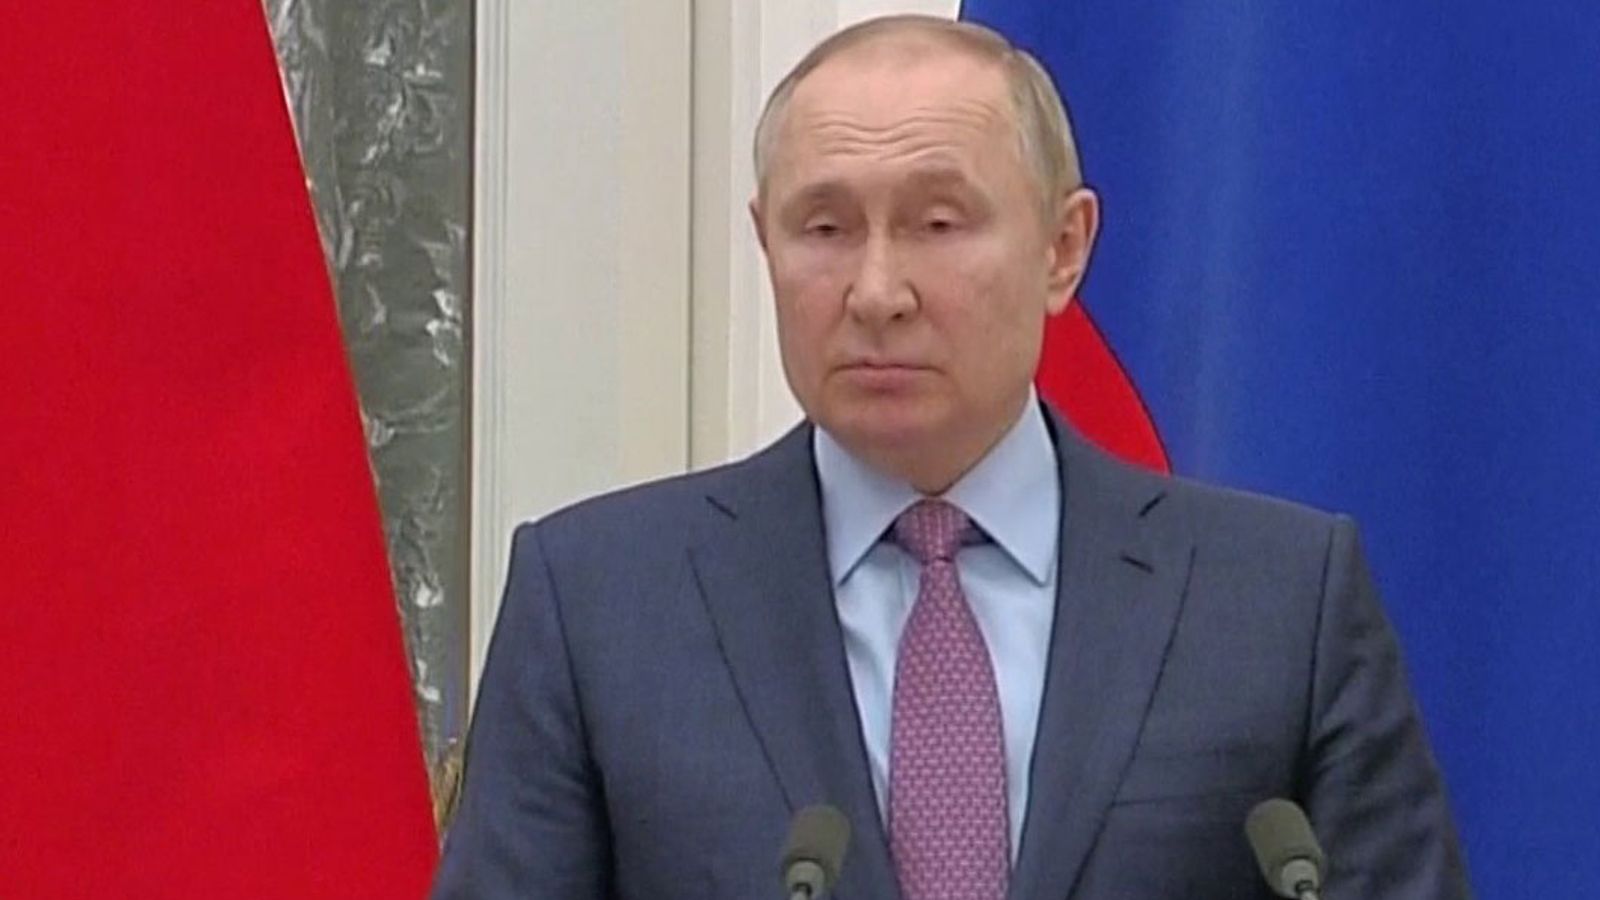 Ukraine crisis: Putin says military drills 'purely defensive' and 'not a threat' as Western leaders warn invasion imminent